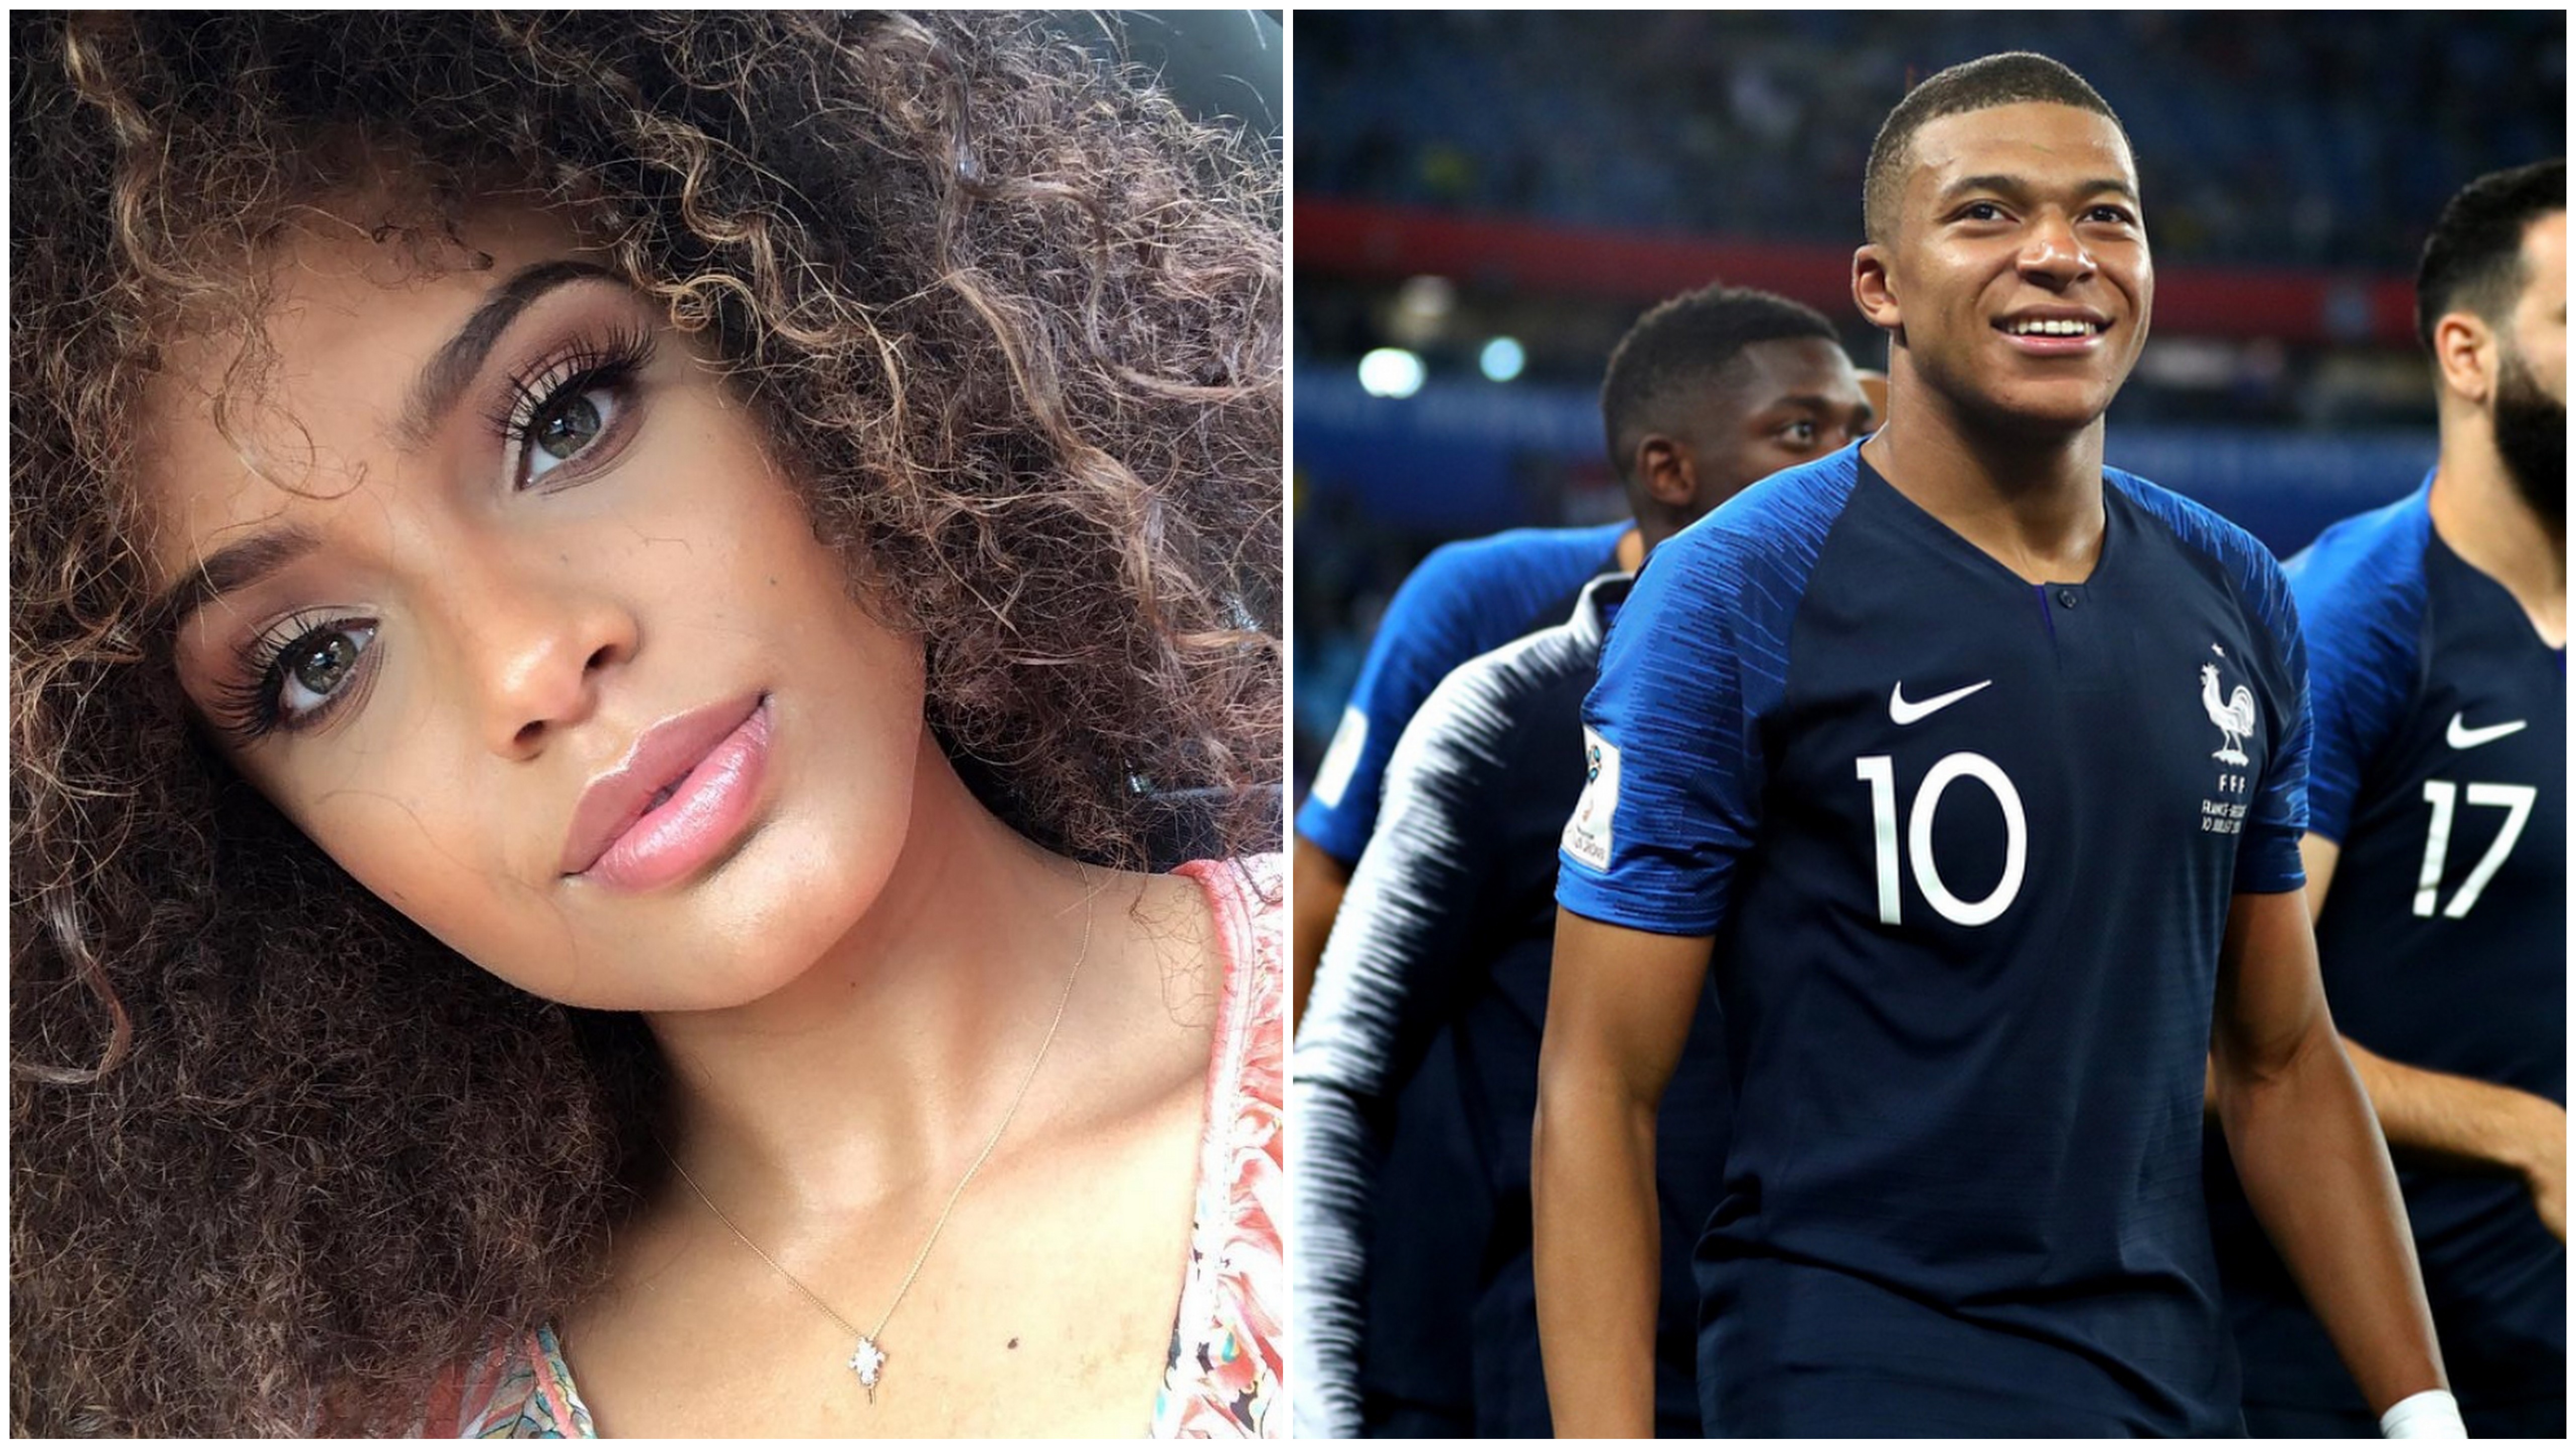 Alicia aylies and mbappe together